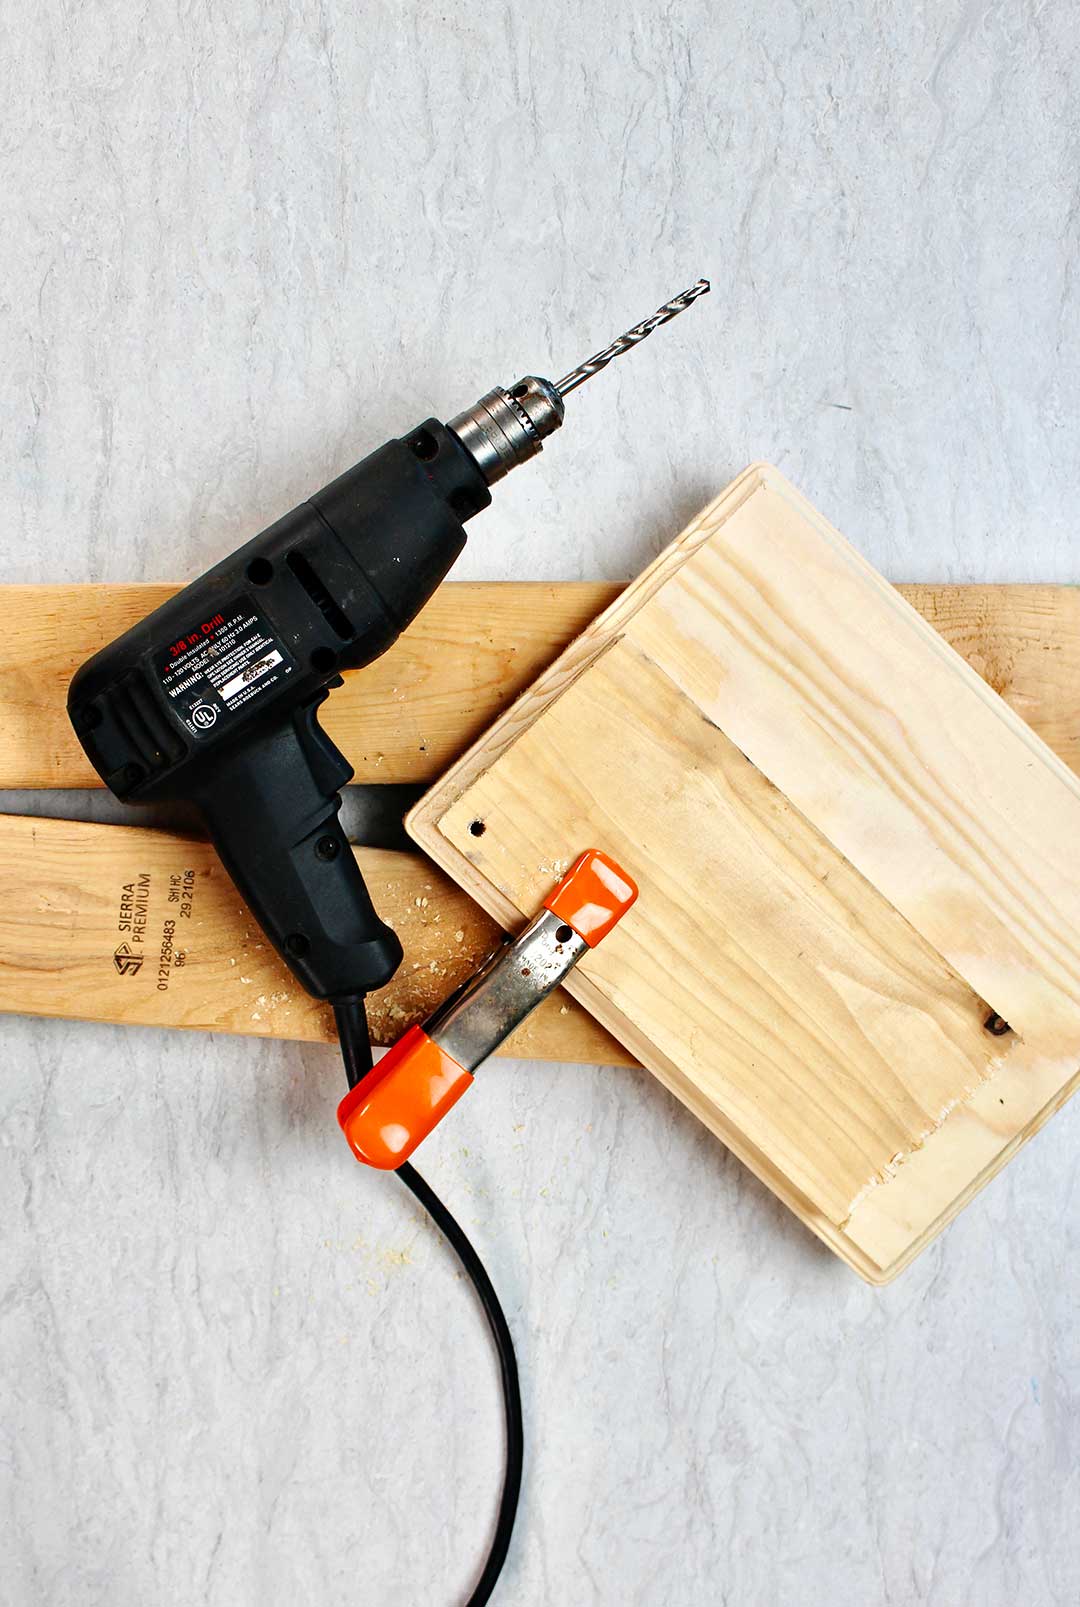 Black drill and orange clamp resting on pieces of wood.